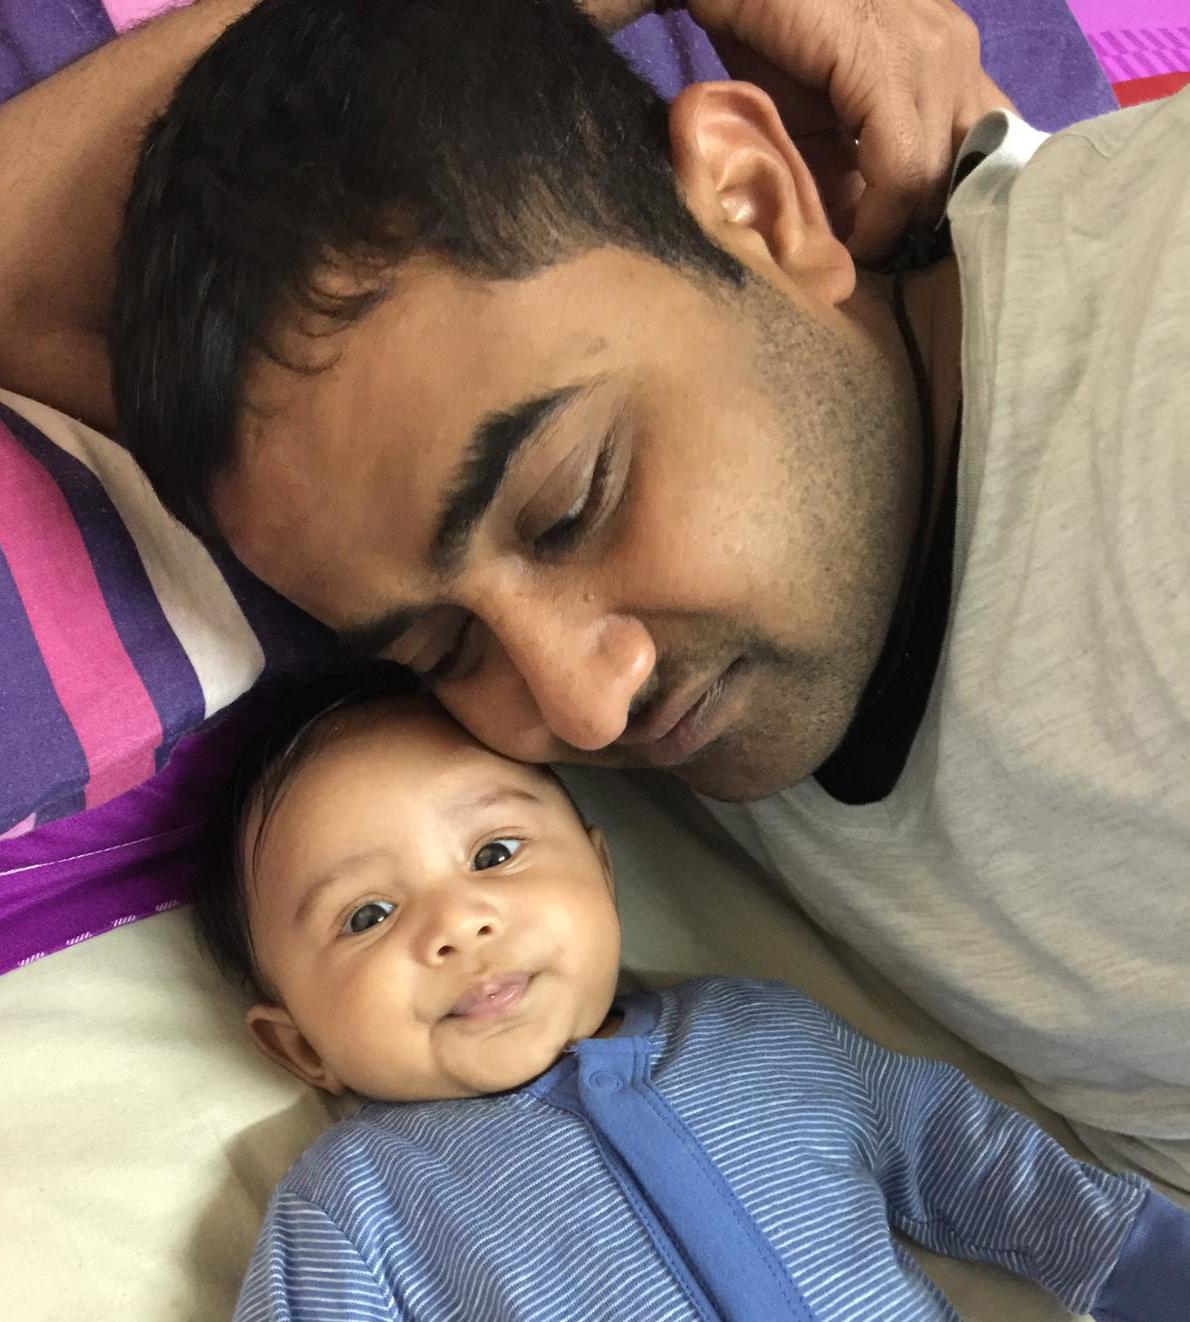 Mr Savaliya last saw his son, Avi, when he was just four months old